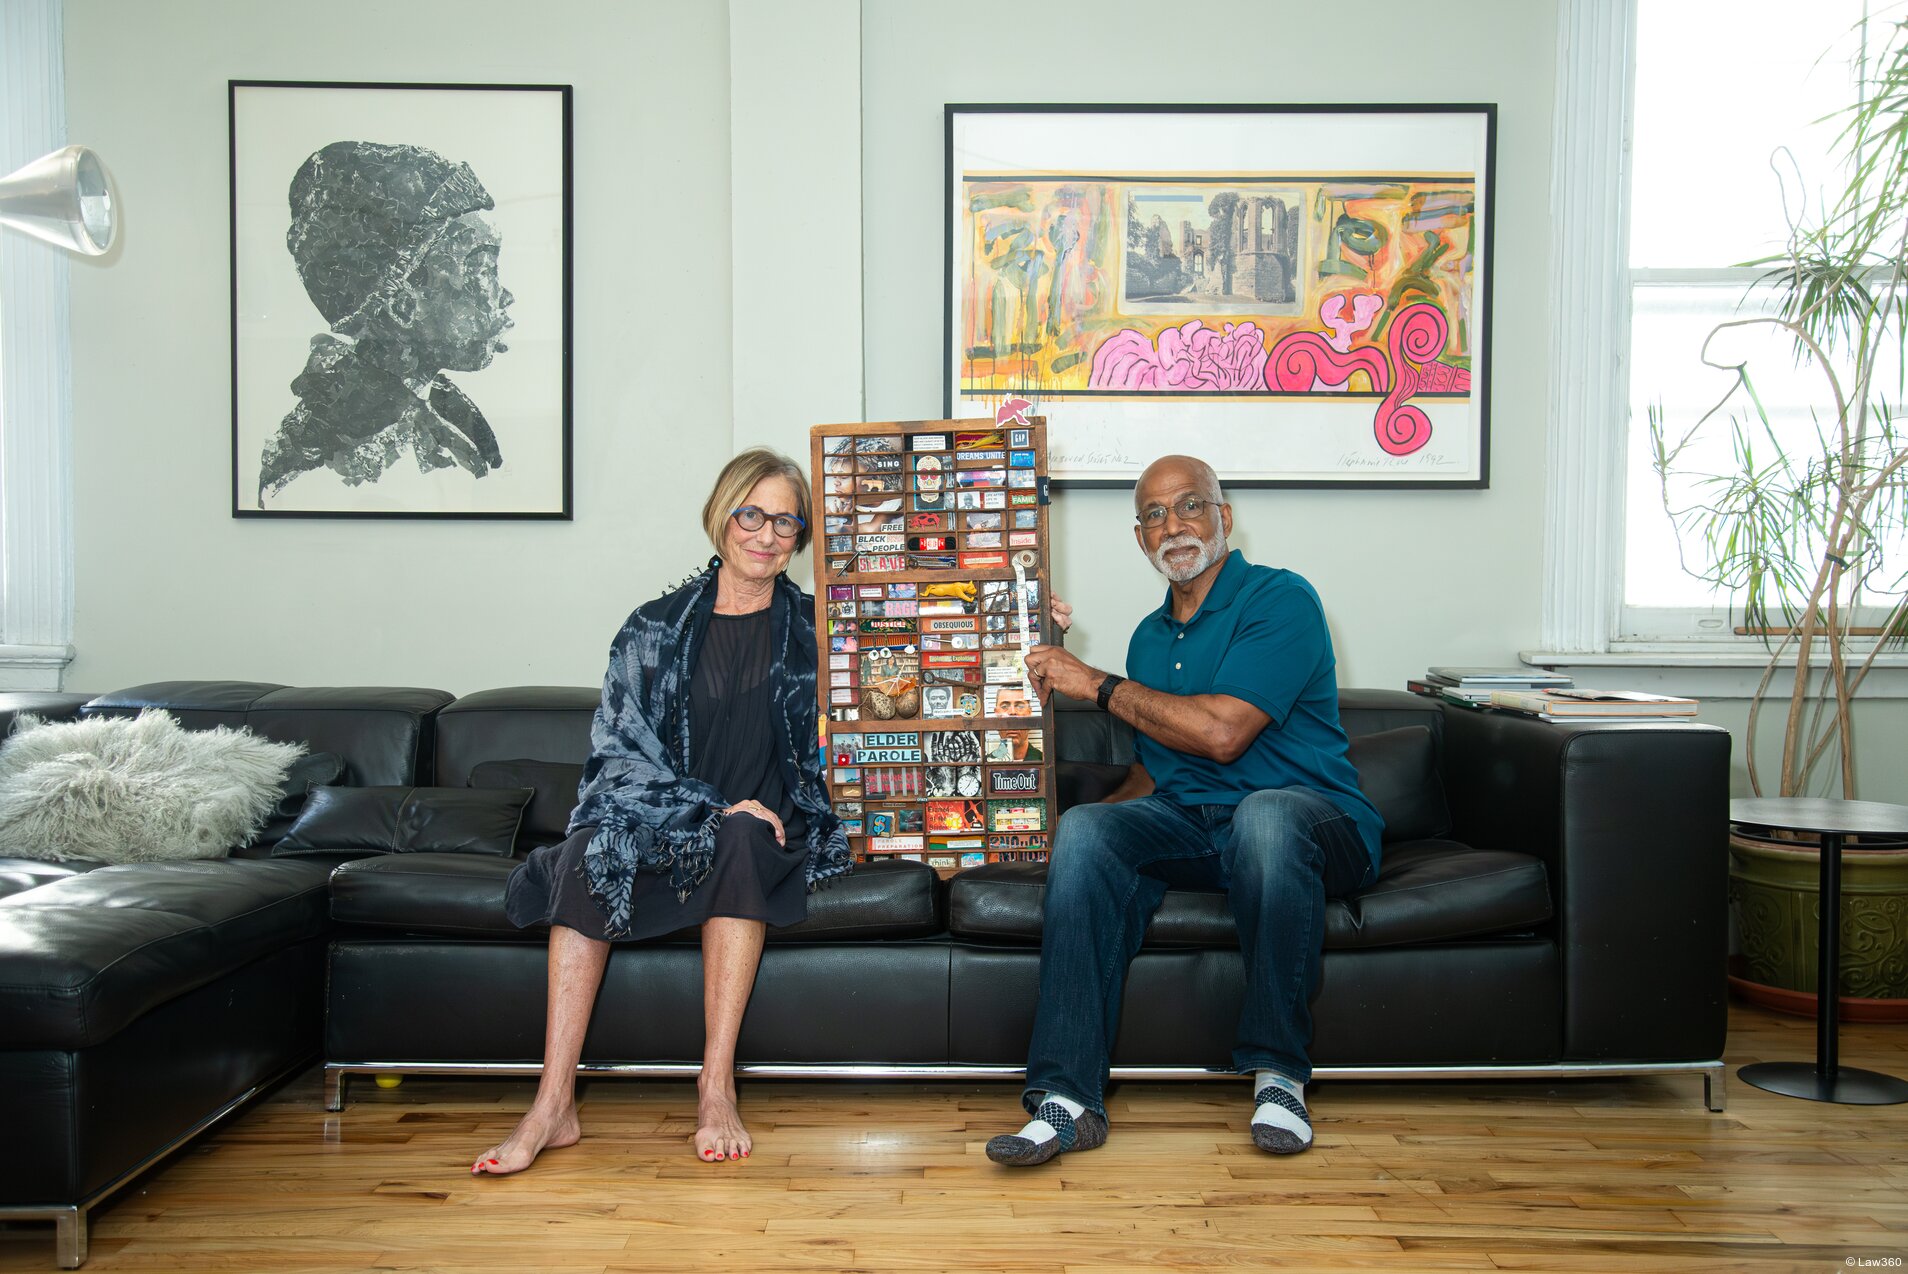 A middle aged white woman and a middle aged Black Hispanic man sit on a sectional couch, holding a piece of artwork. Two other pieces of artwork are on the wall behind them.